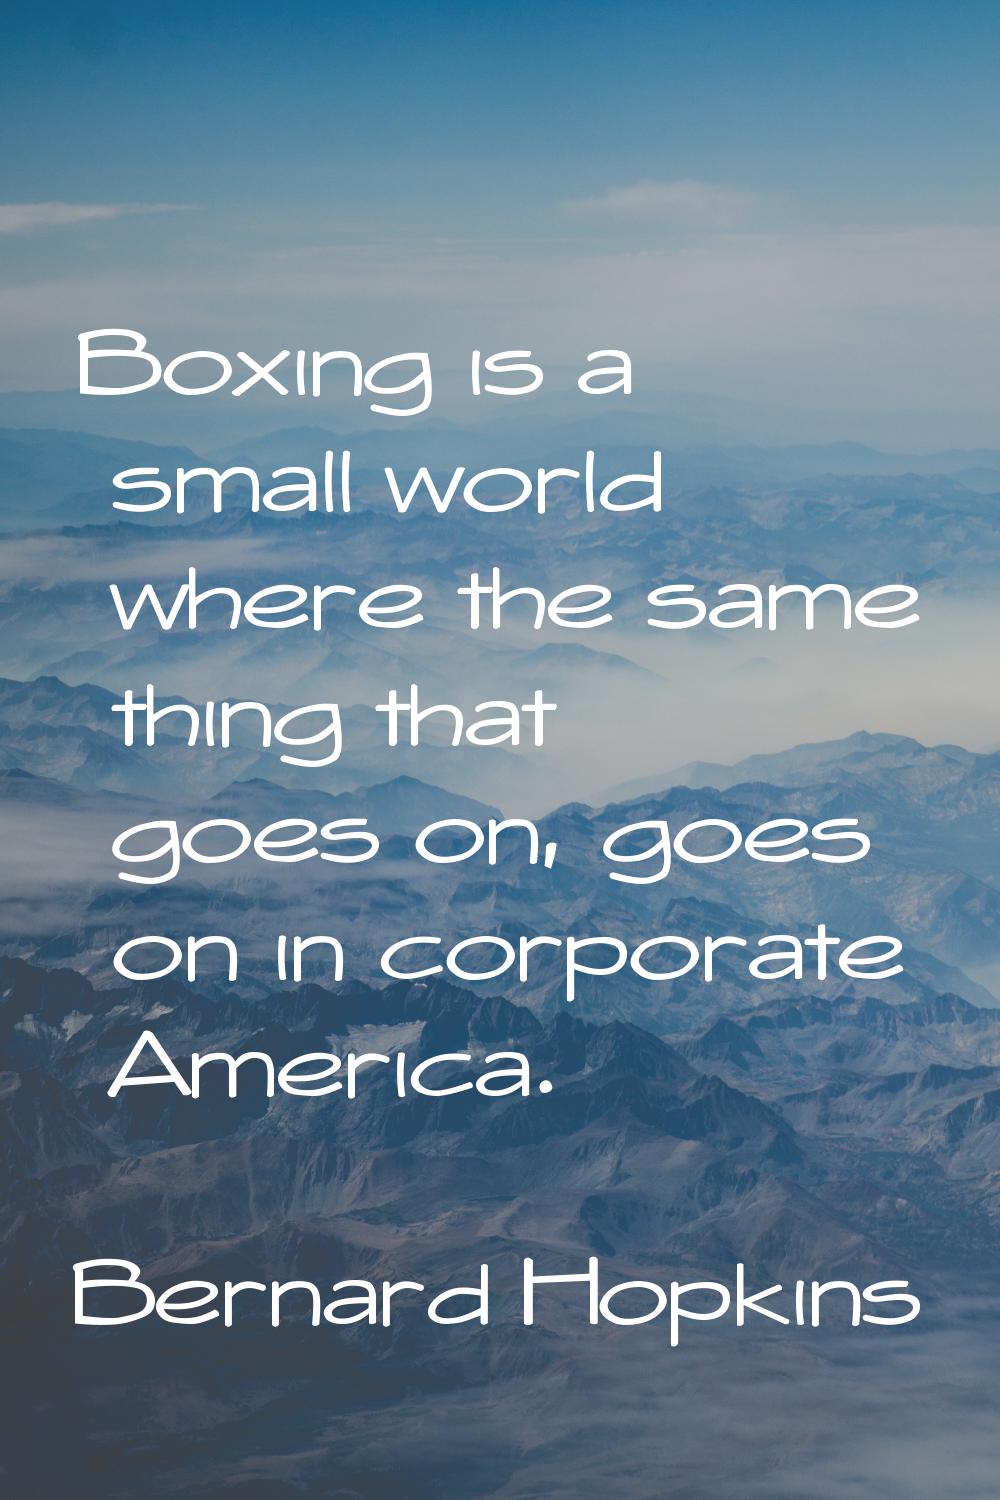 Boxing is a small world where the same thing that goes on, goes on in corporate America.